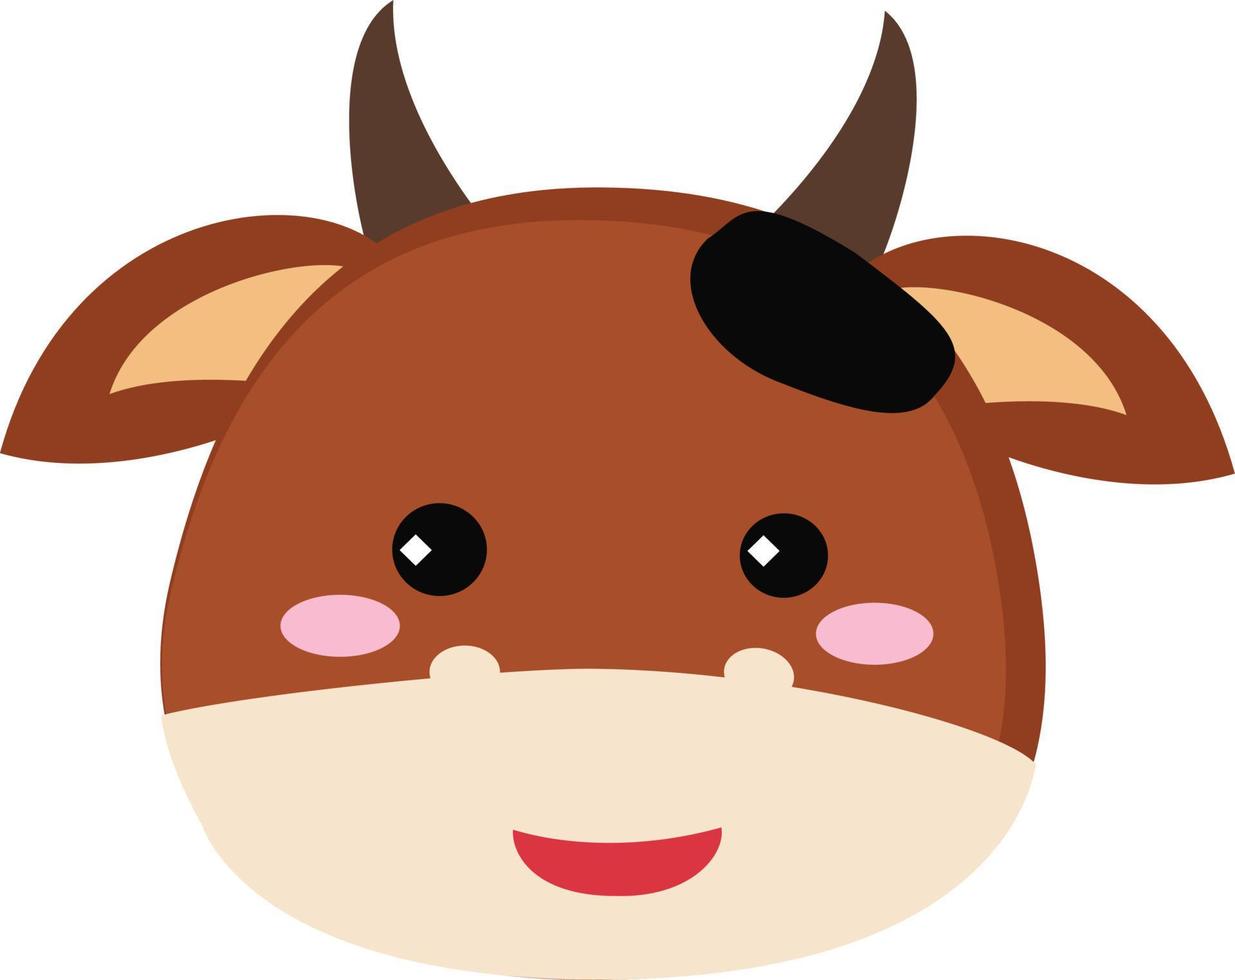 Cute cow head, illustration, vector on white background